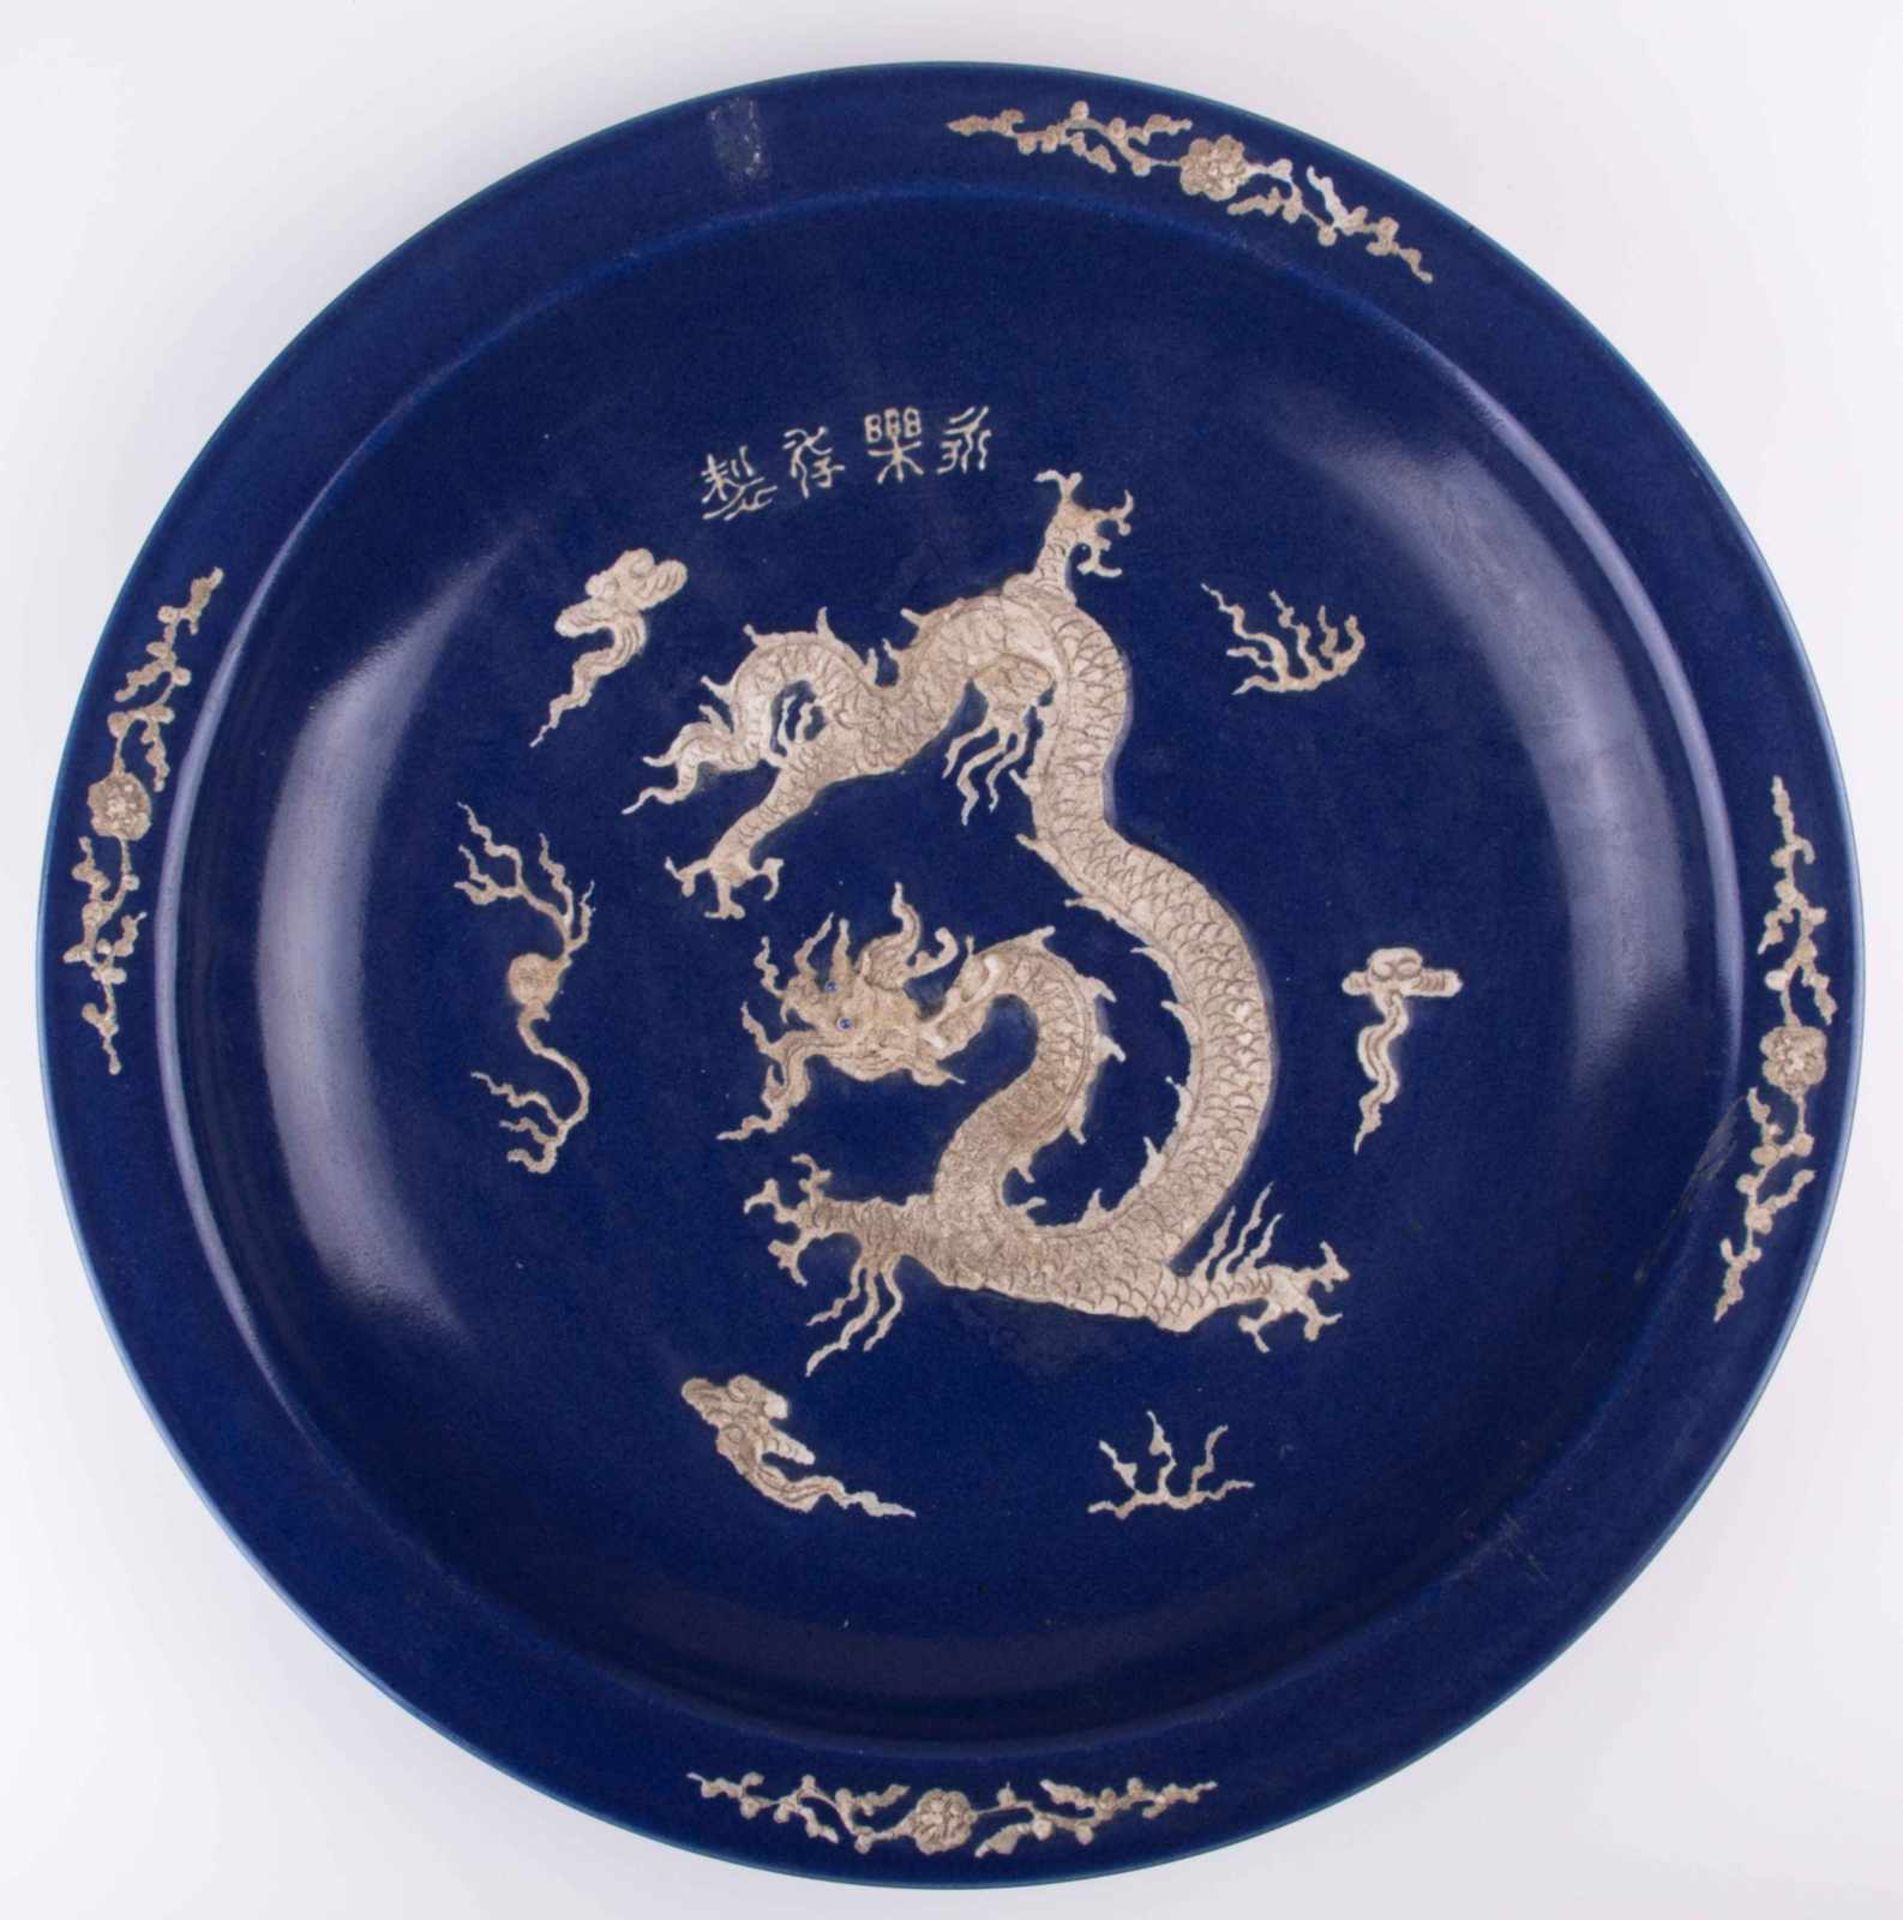 Großer Teller China 19./20. Jhd. / Large plate, China 19th/20th century blau mit reliefiertem